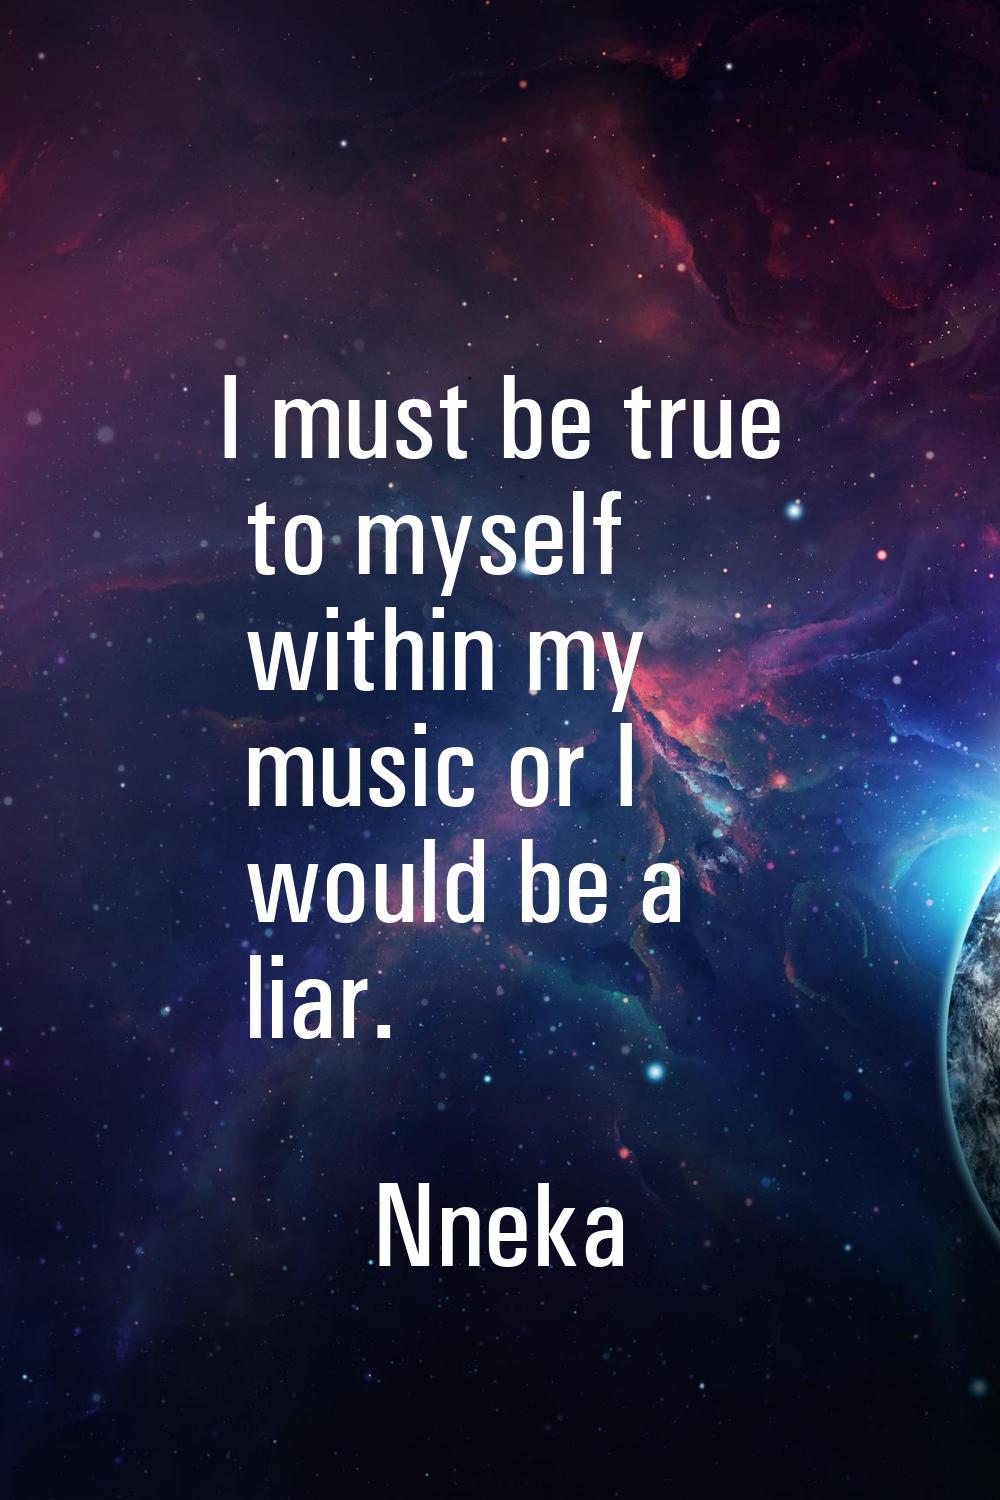 I must be true to myself within my music or I would be a liar.